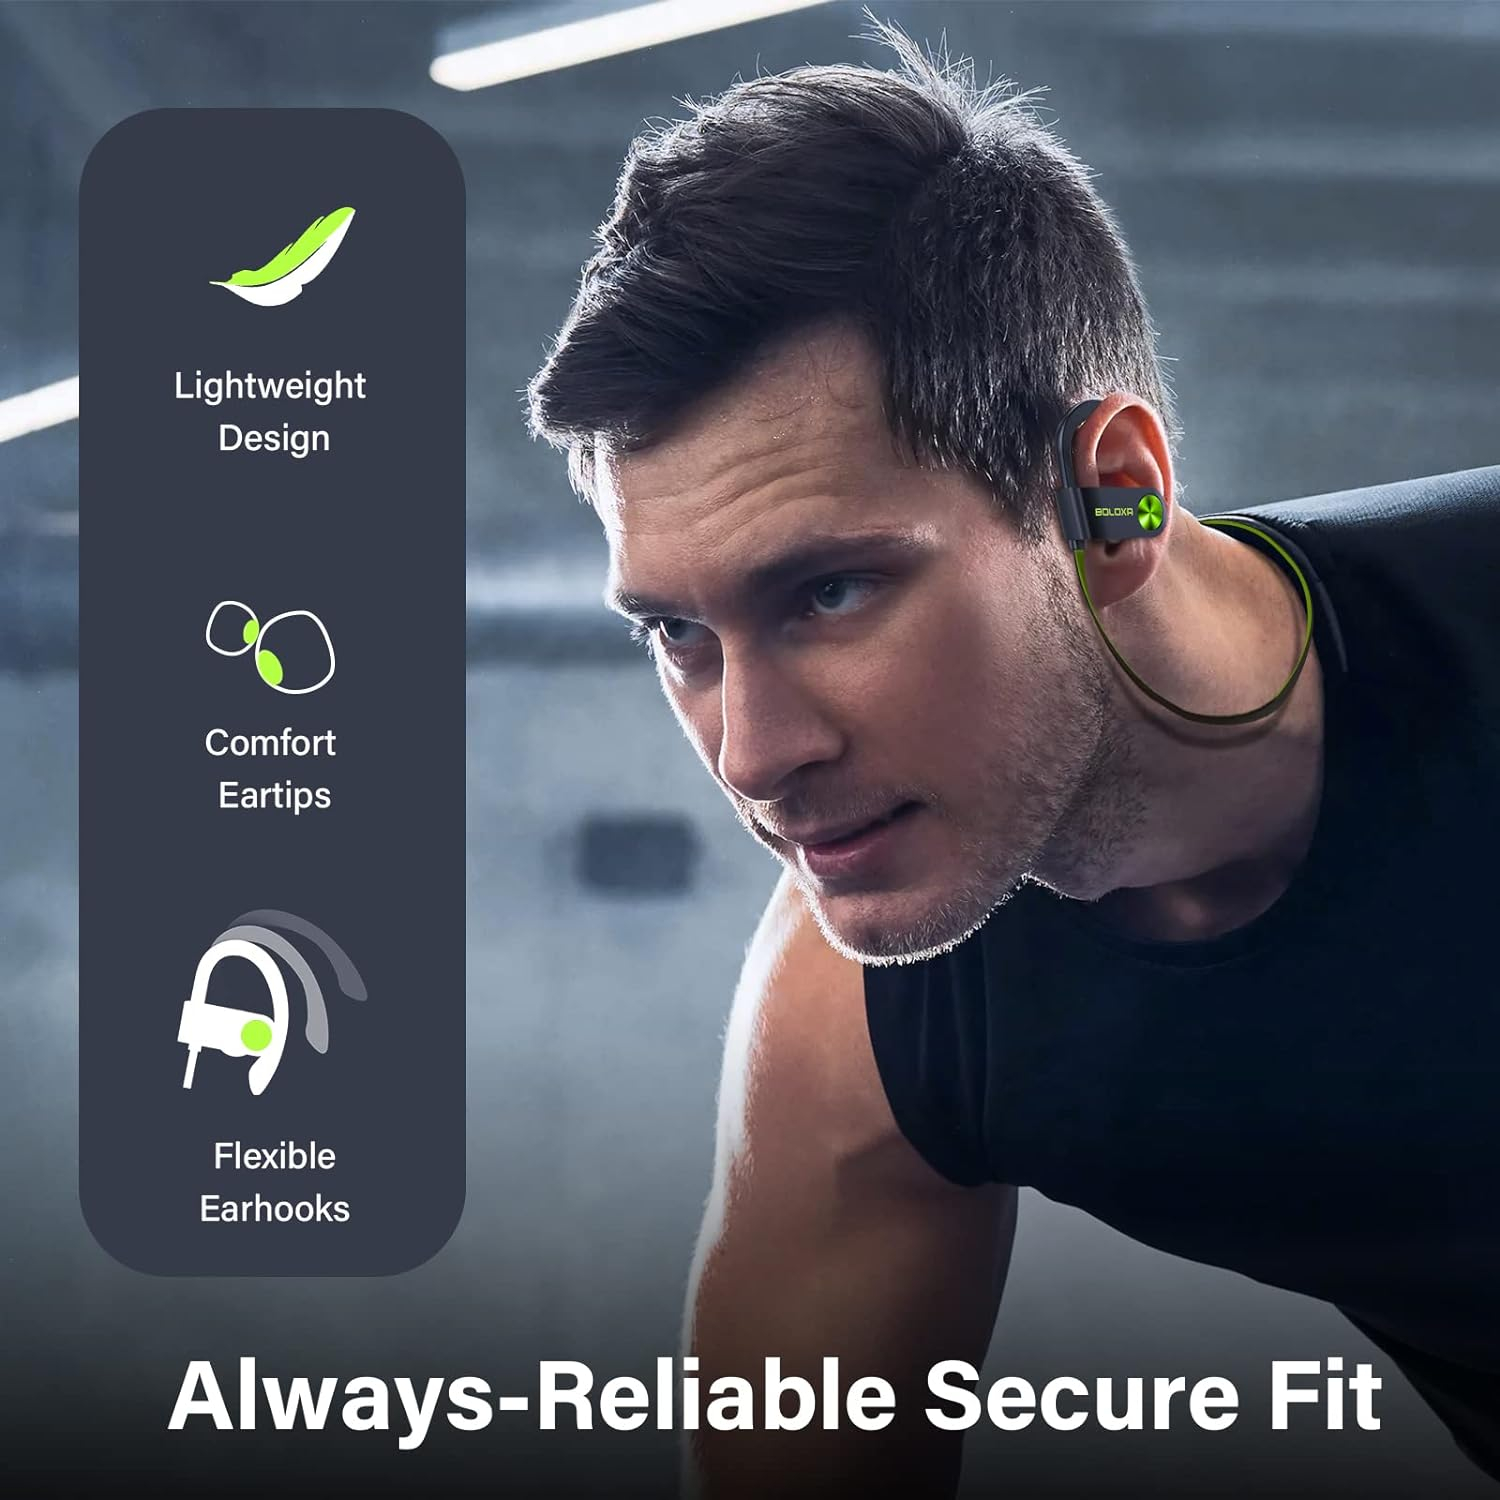 BOLOXA Bluetooth Headphones 5.3 Wireless Earbuds IPX7 Waterproof  16Hrs Long Battery Over-Ear Stereo Bass Earphones with Earhooks Running Headset with Mic  Storage Bag for Workout Gym Sports